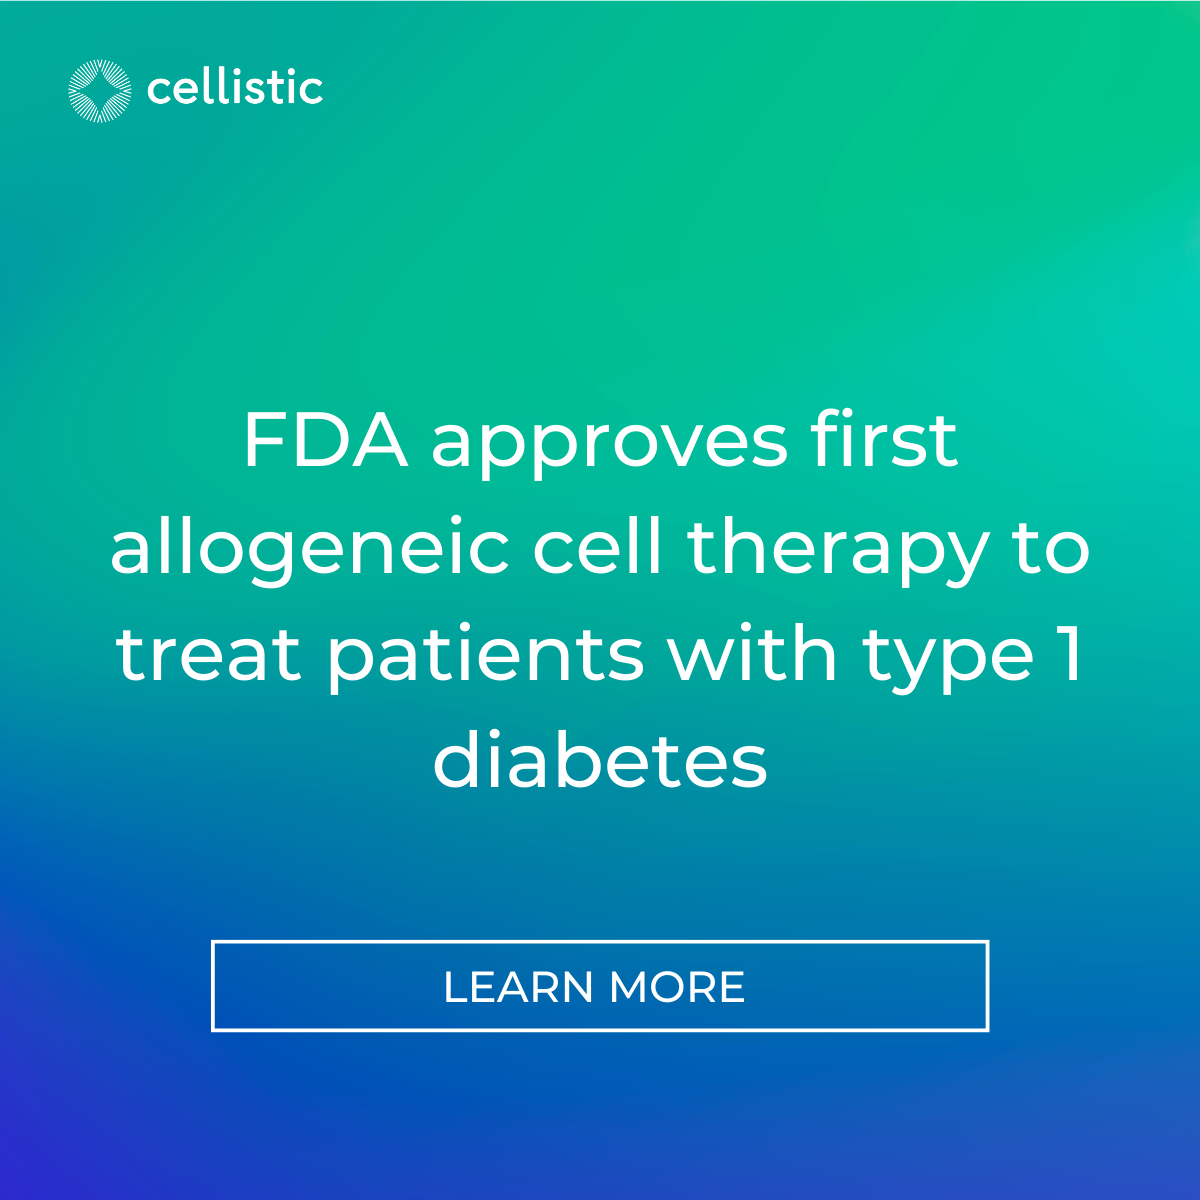 The next milestone in allogeneic cell therapy development: FDA approval for allogeneic type 1 diabetes treatment